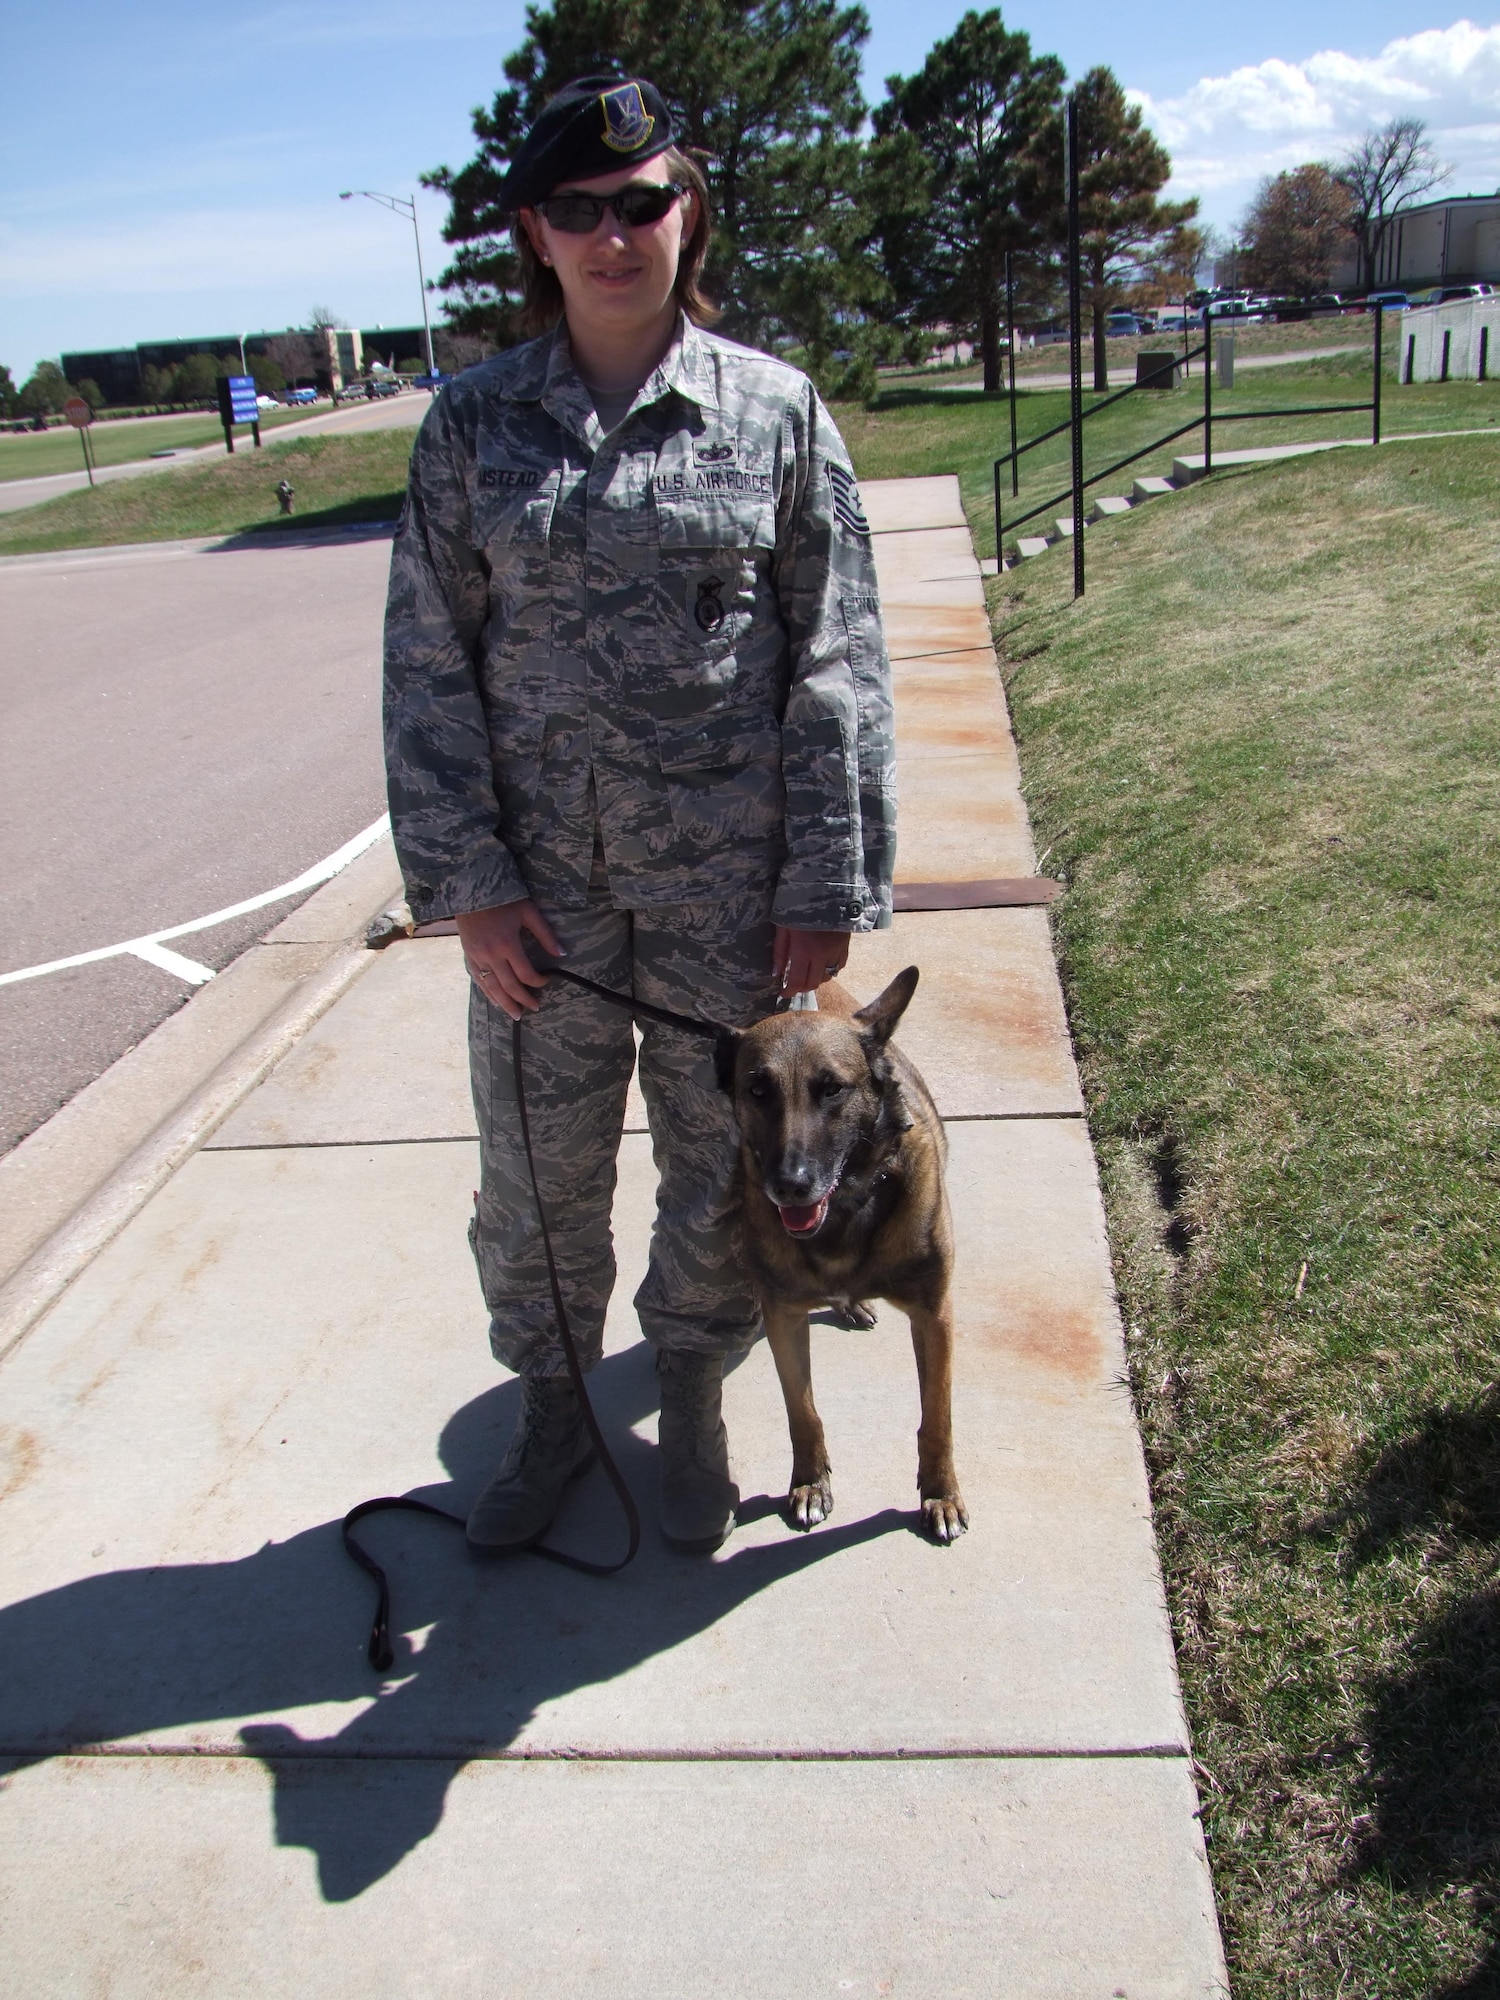 Tech. Sgt. Ashley-Marie Umstead stands with therapy dog Sato, a 5-year-old Belgian Malinois. Sato is a retired military working dog now serving as a therapy dog at the U.S. Air Force Academy, Colo. He previously served as a bomb dog for the 10th Security Forces Squadron.  (U.S. Air Force photo/Amber Baillie)  